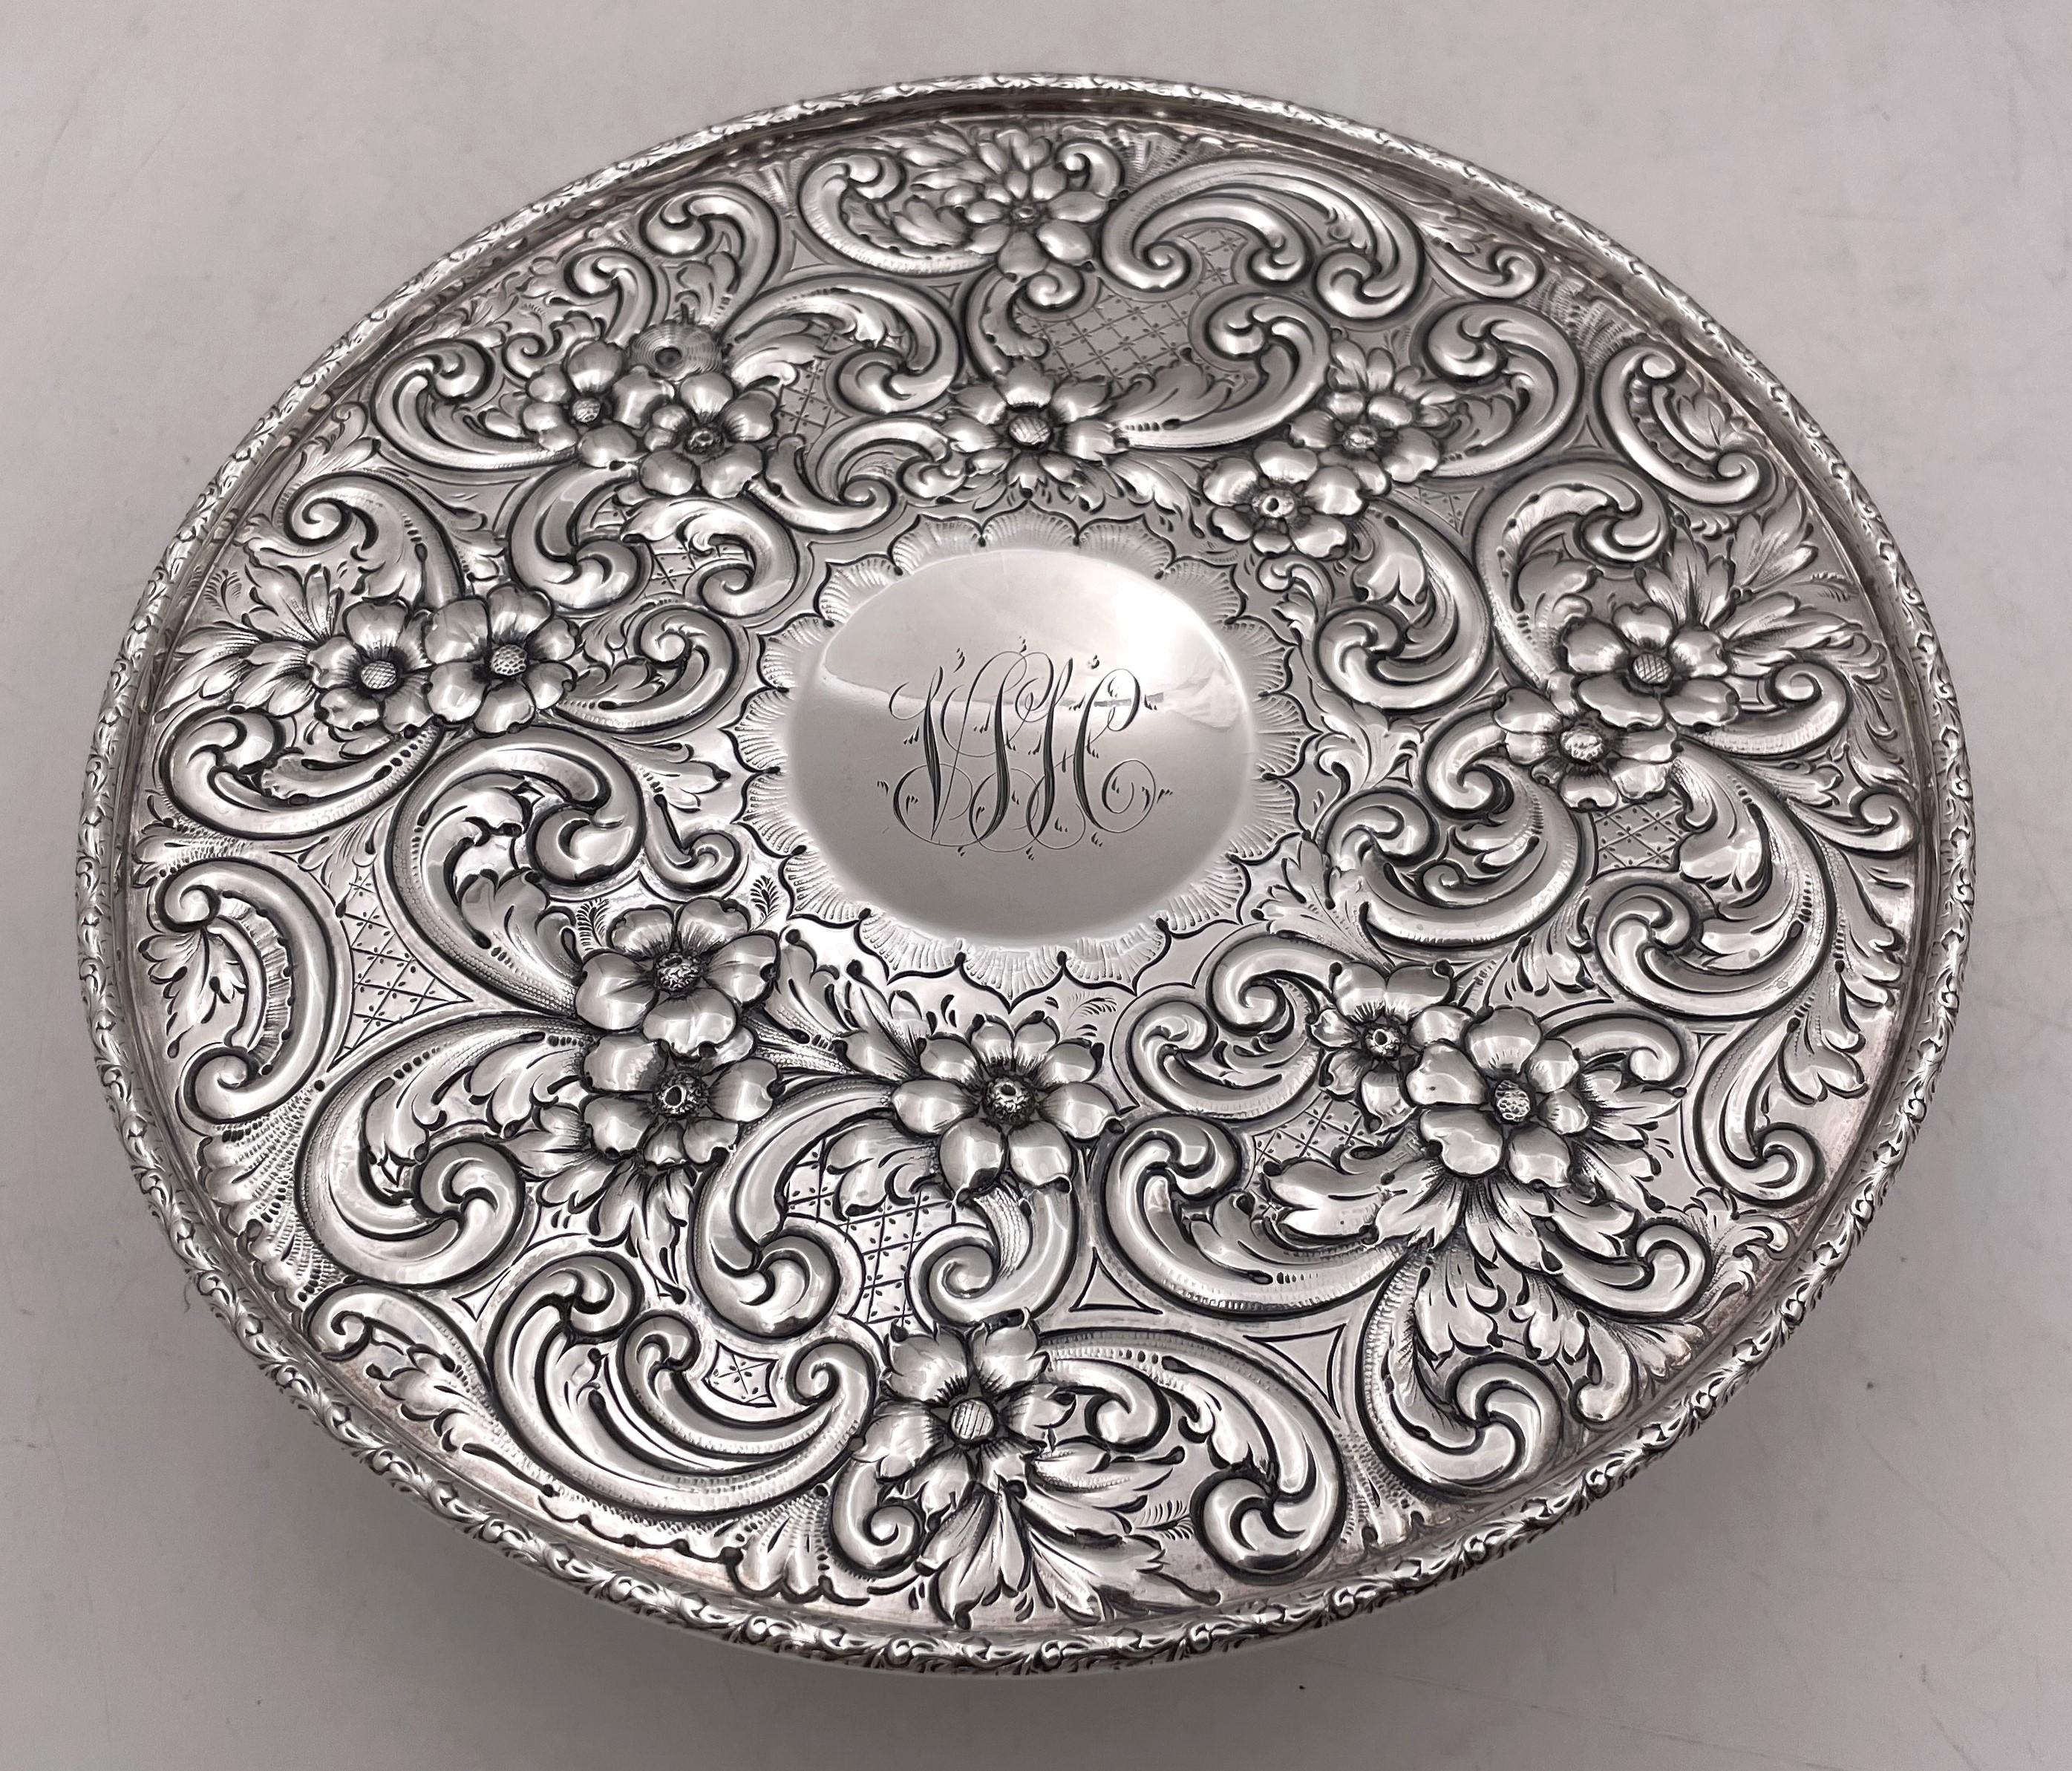 Dominick & Haff Pair of Sterling Silver 1908 Compotes Tazze/ Bowls Art Nouveau In Good Condition For Sale In New York, NY